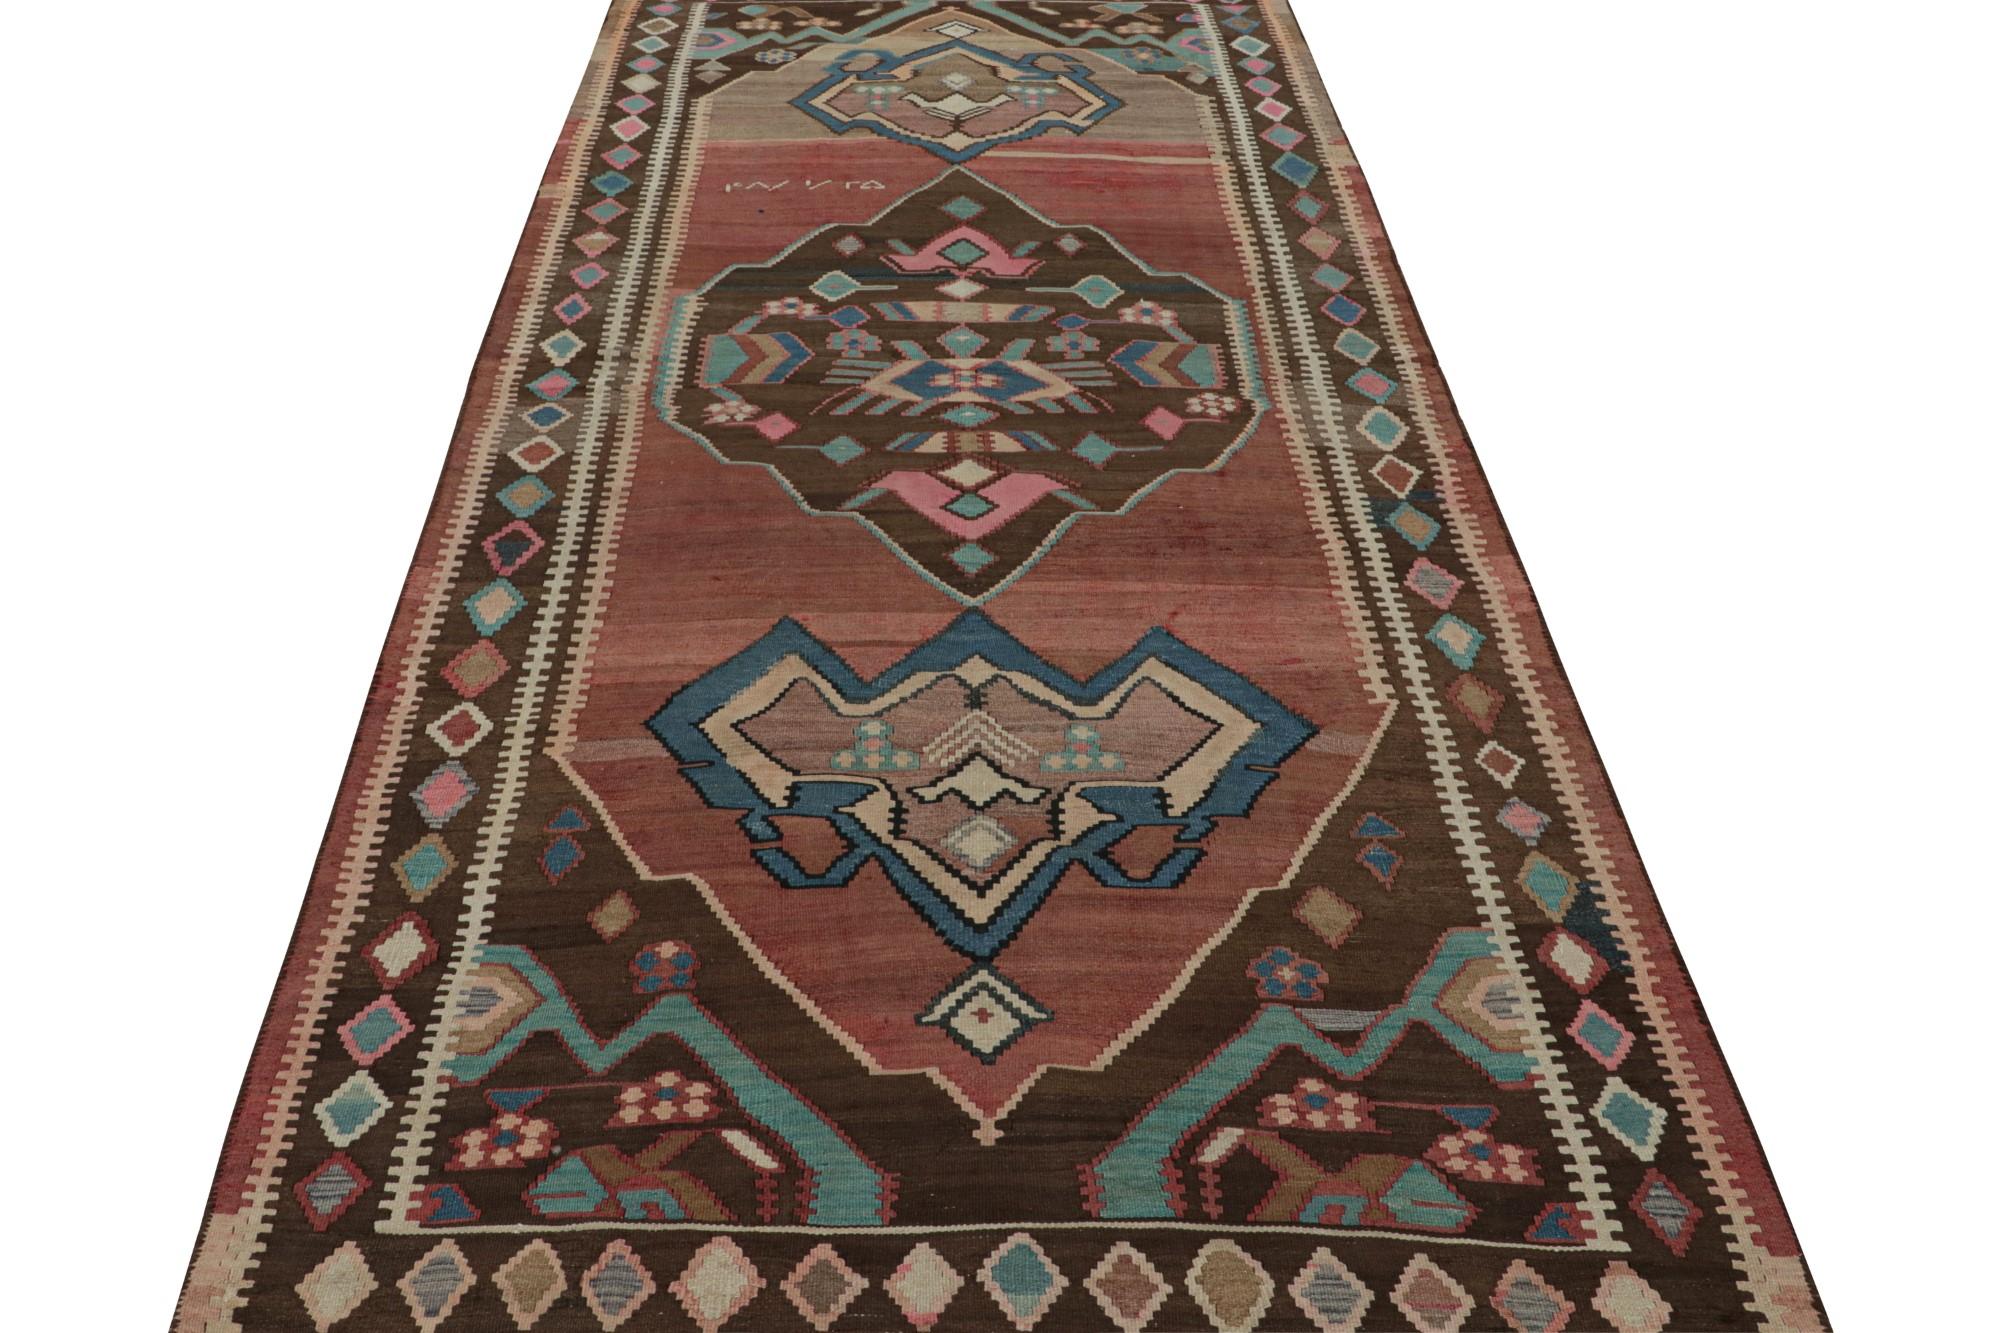 Hand-Knotted Vintage Afghan Tribal Kilim Rug, with Geometric Patterns, from Rug & Kilim For Sale